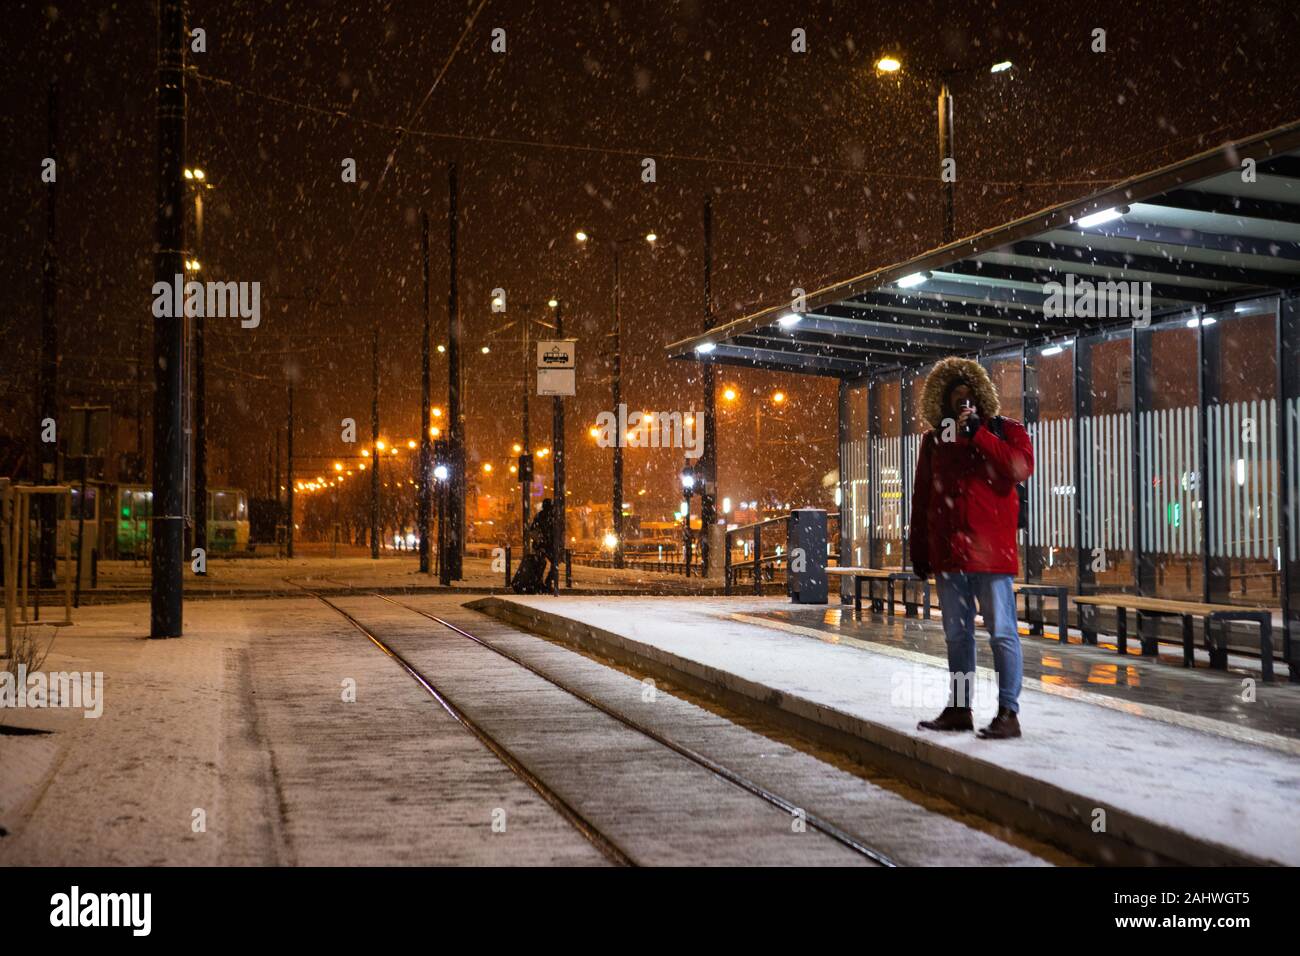 man in red winter coat standing at bus tram stop waiting for public transport Stock Photo